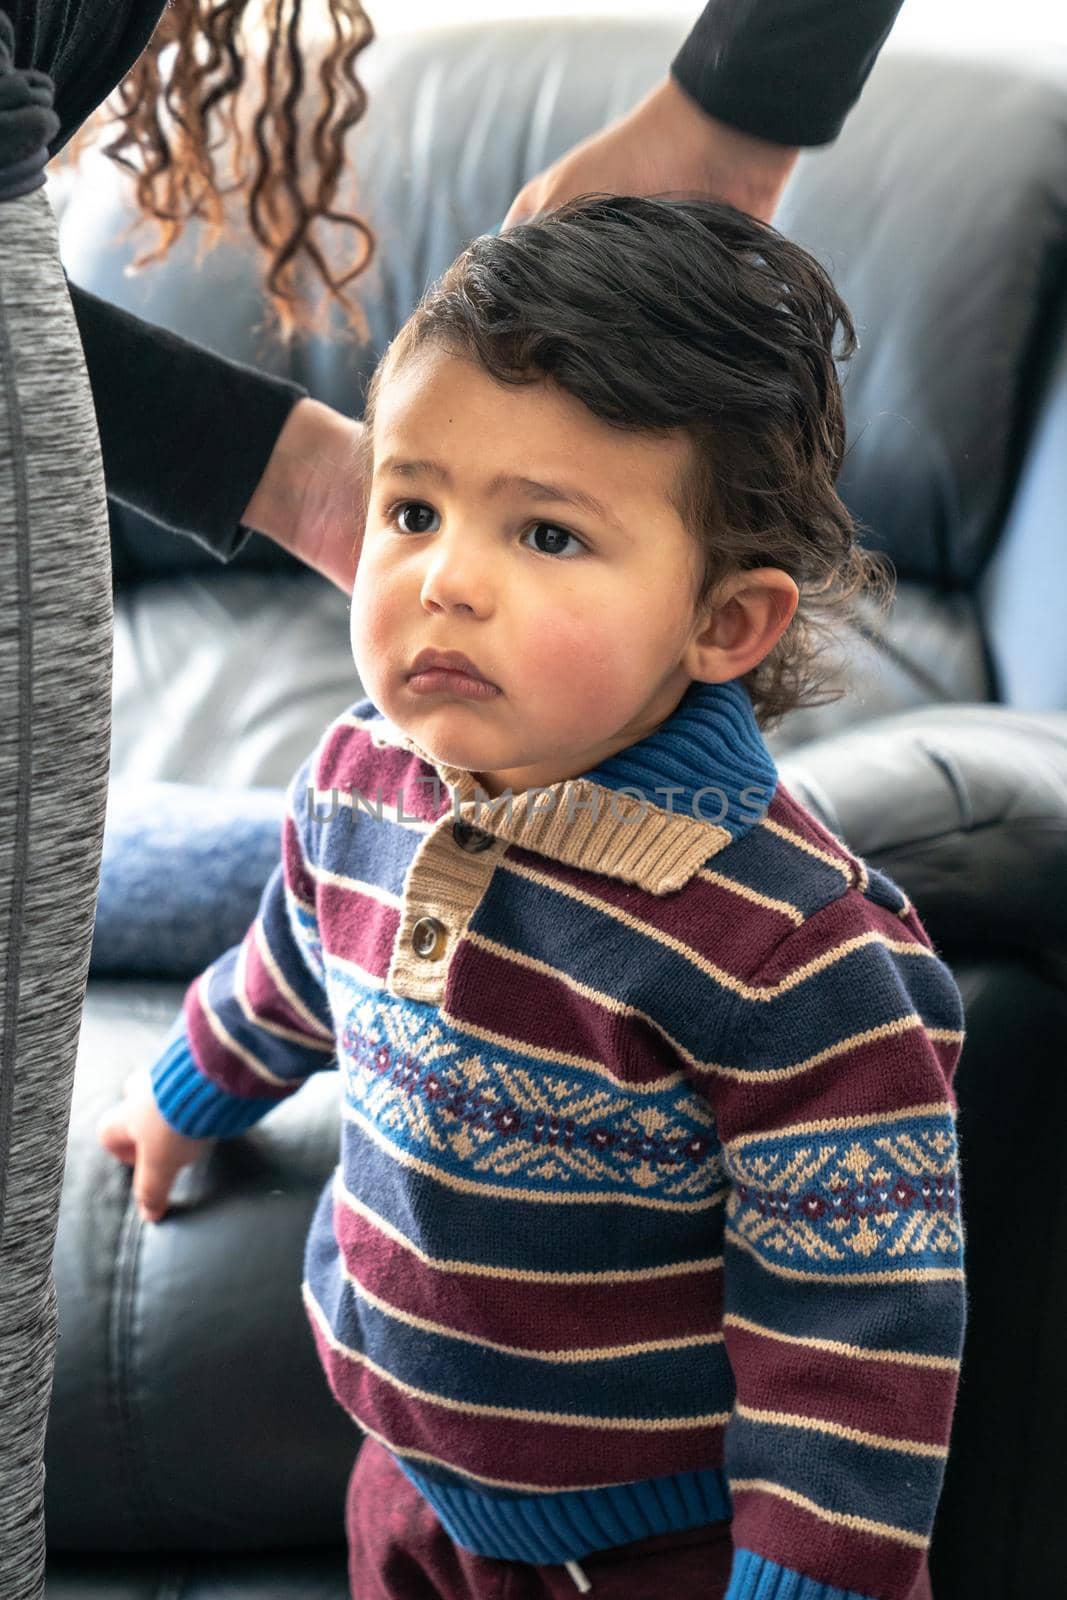 A handsome young baby boy or toddler with long curly brown hair wearing a patterned and striped collared sweater stands by his mother's leg as she combs and fixes the child's hair.